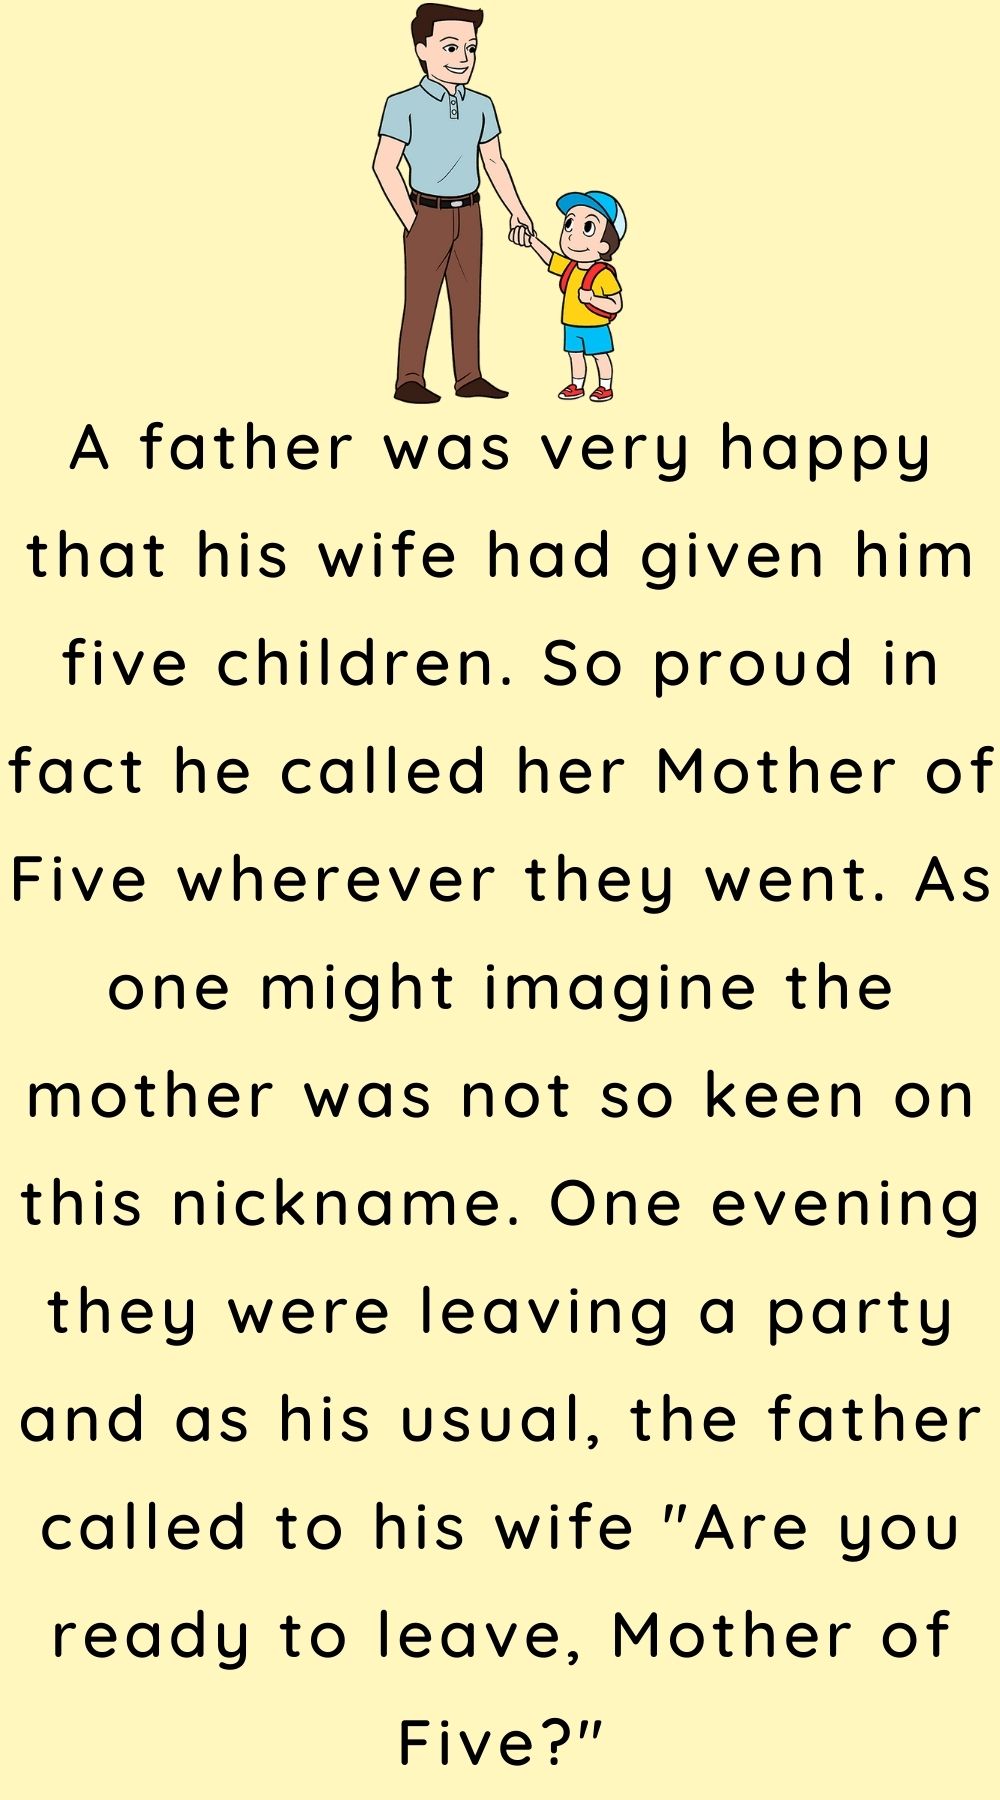 A father was very happy that his wife